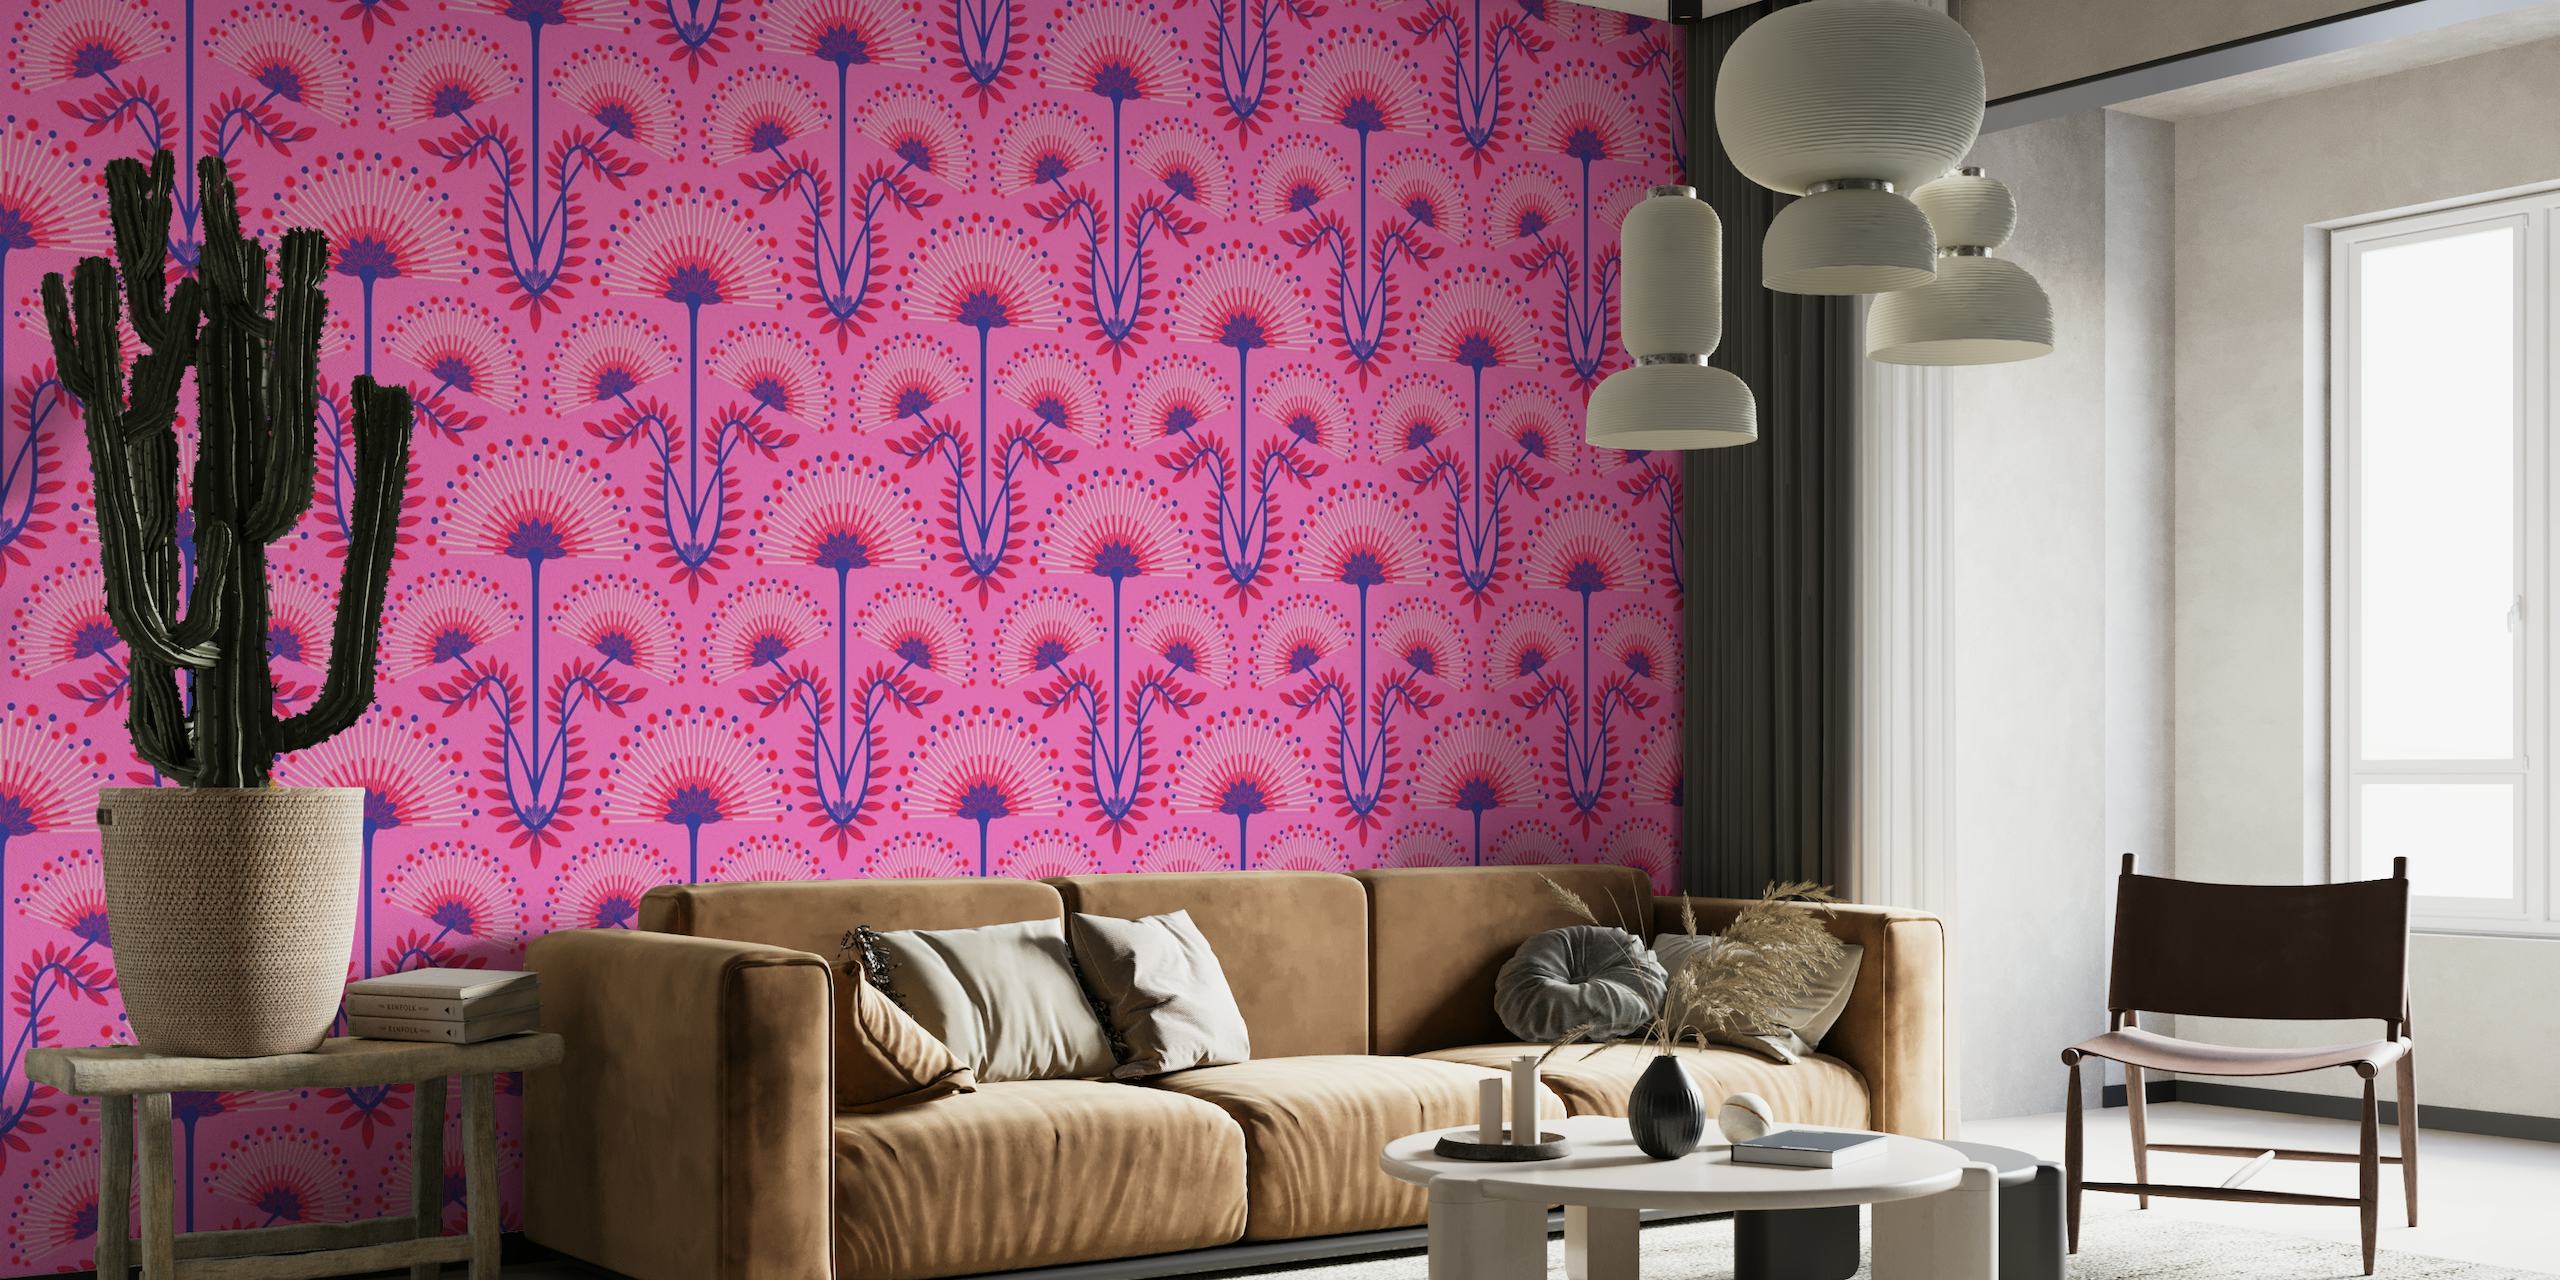 MIMOSA Art Deco Floral - Fuchsia Pink - Large ταπετσαρία